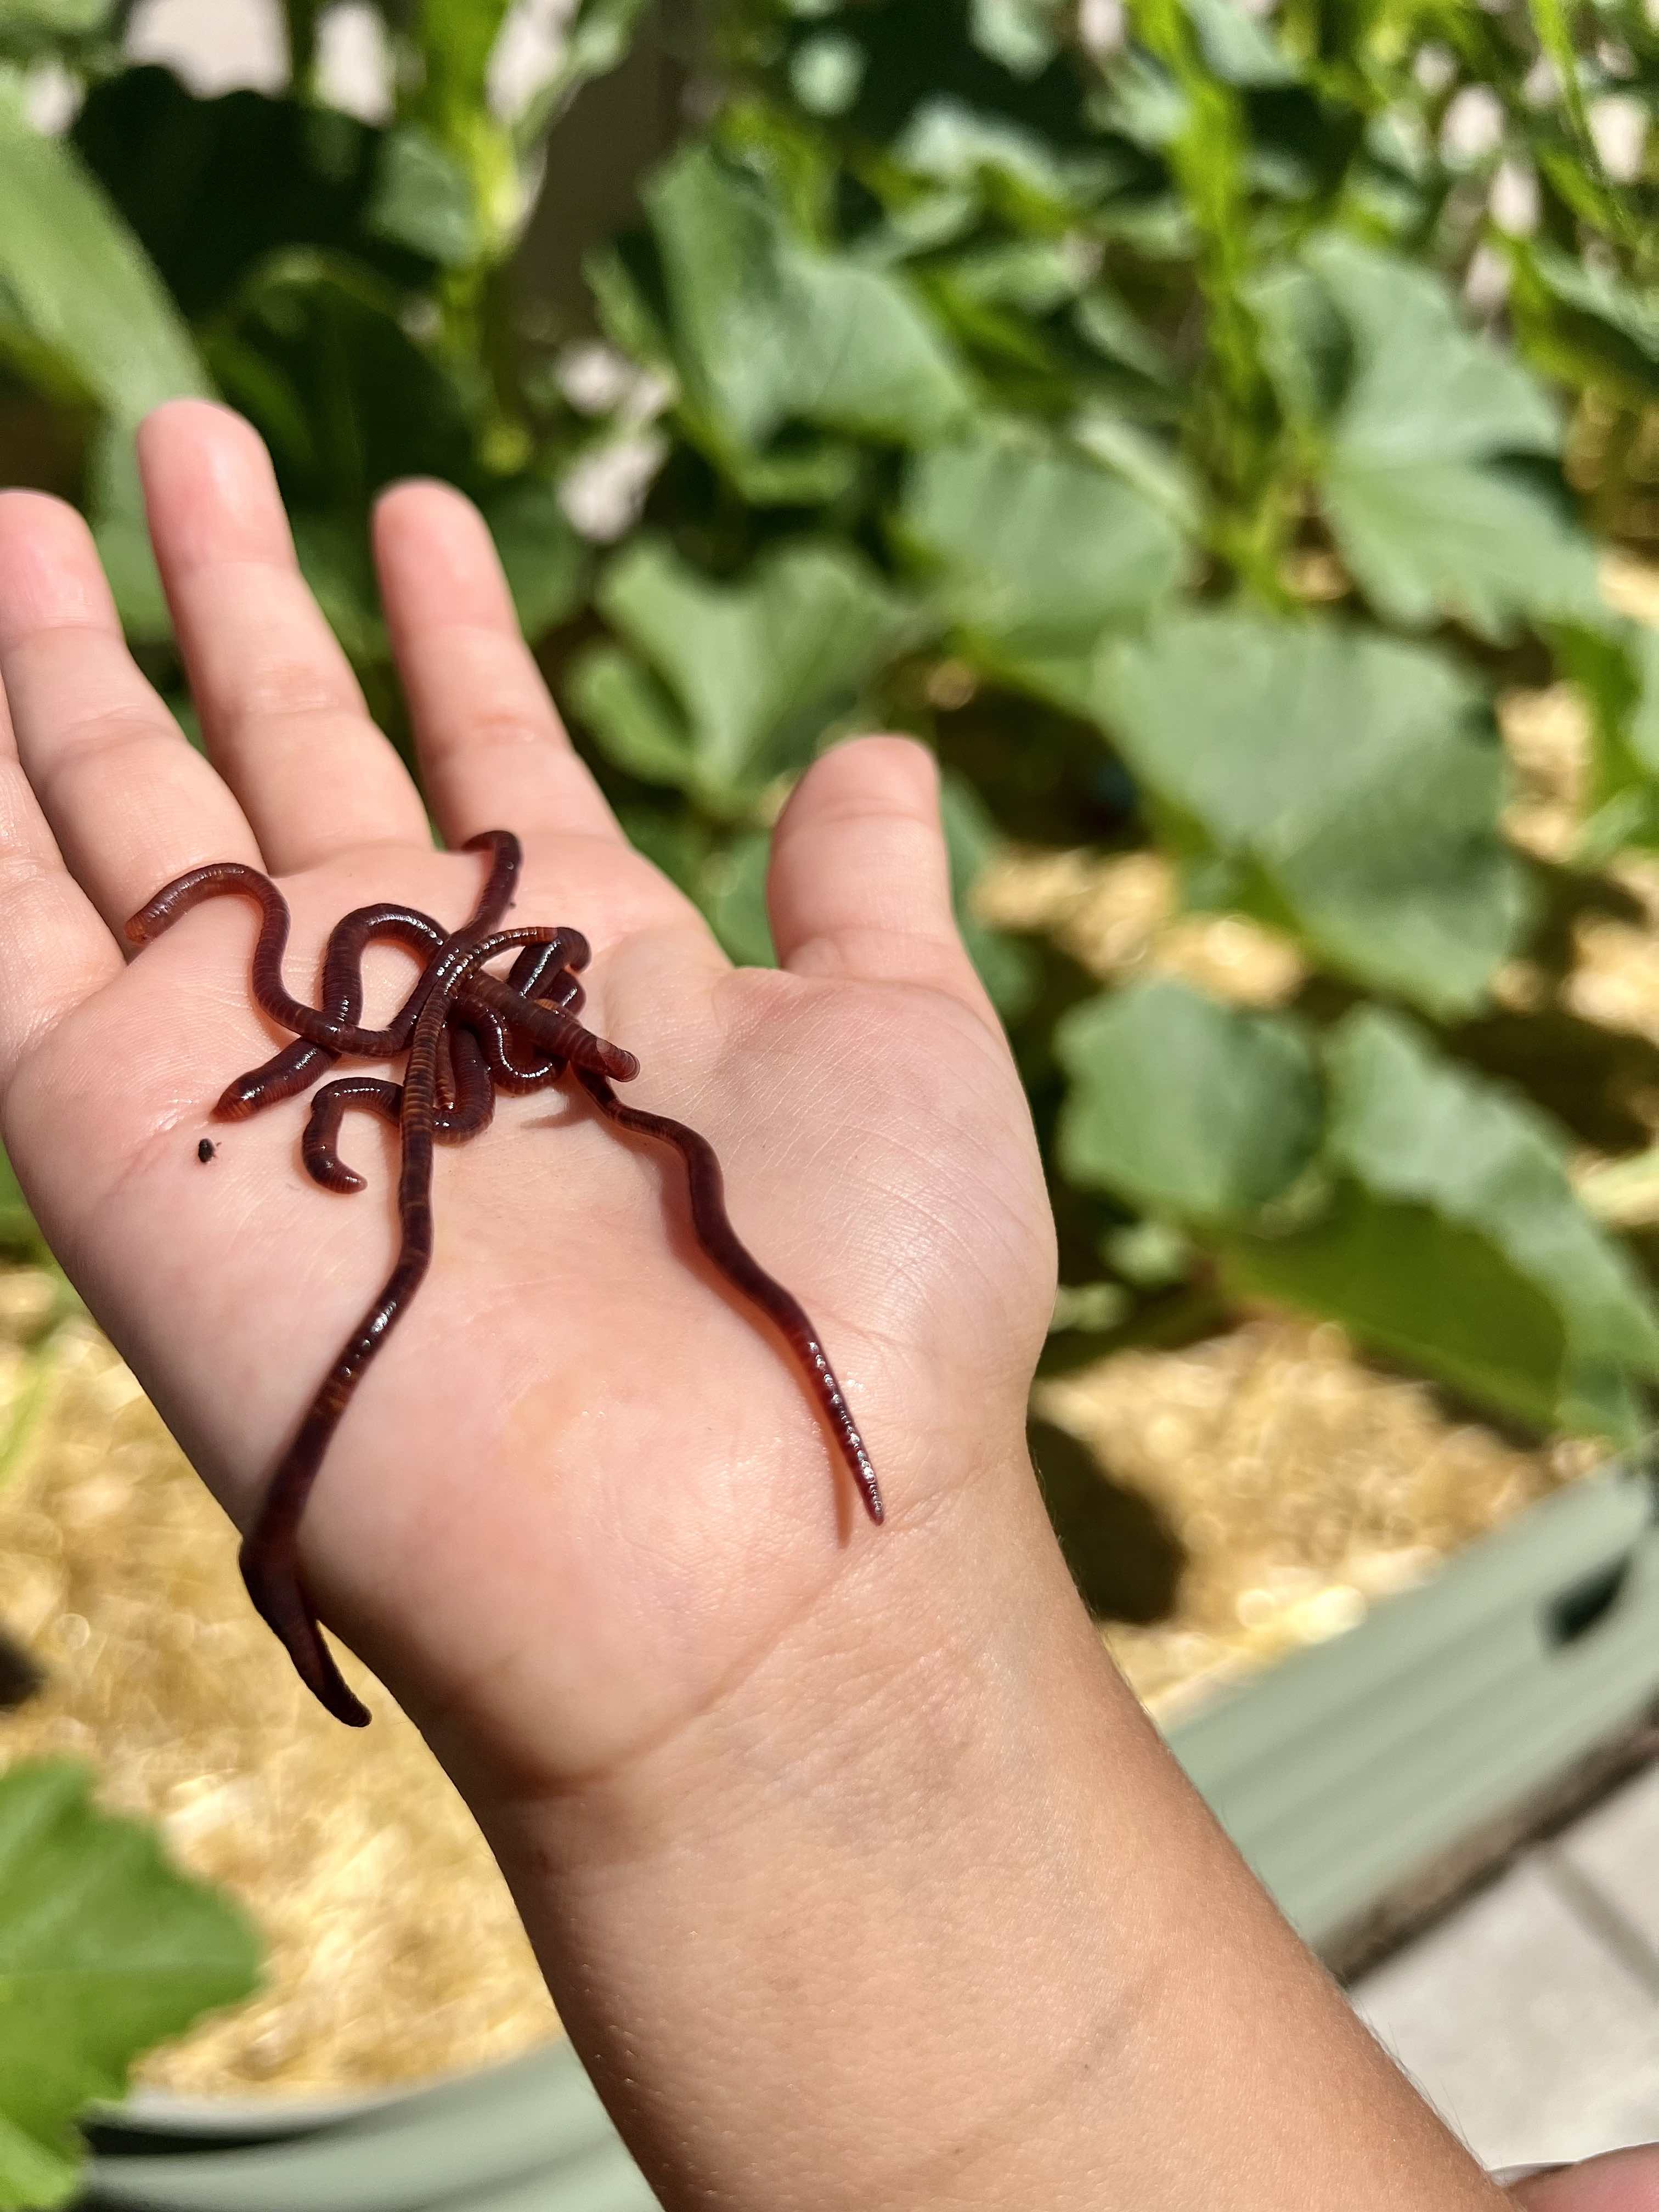 Buy Bulk Red Wiggler Worms  Live Red Wigglers for Sale